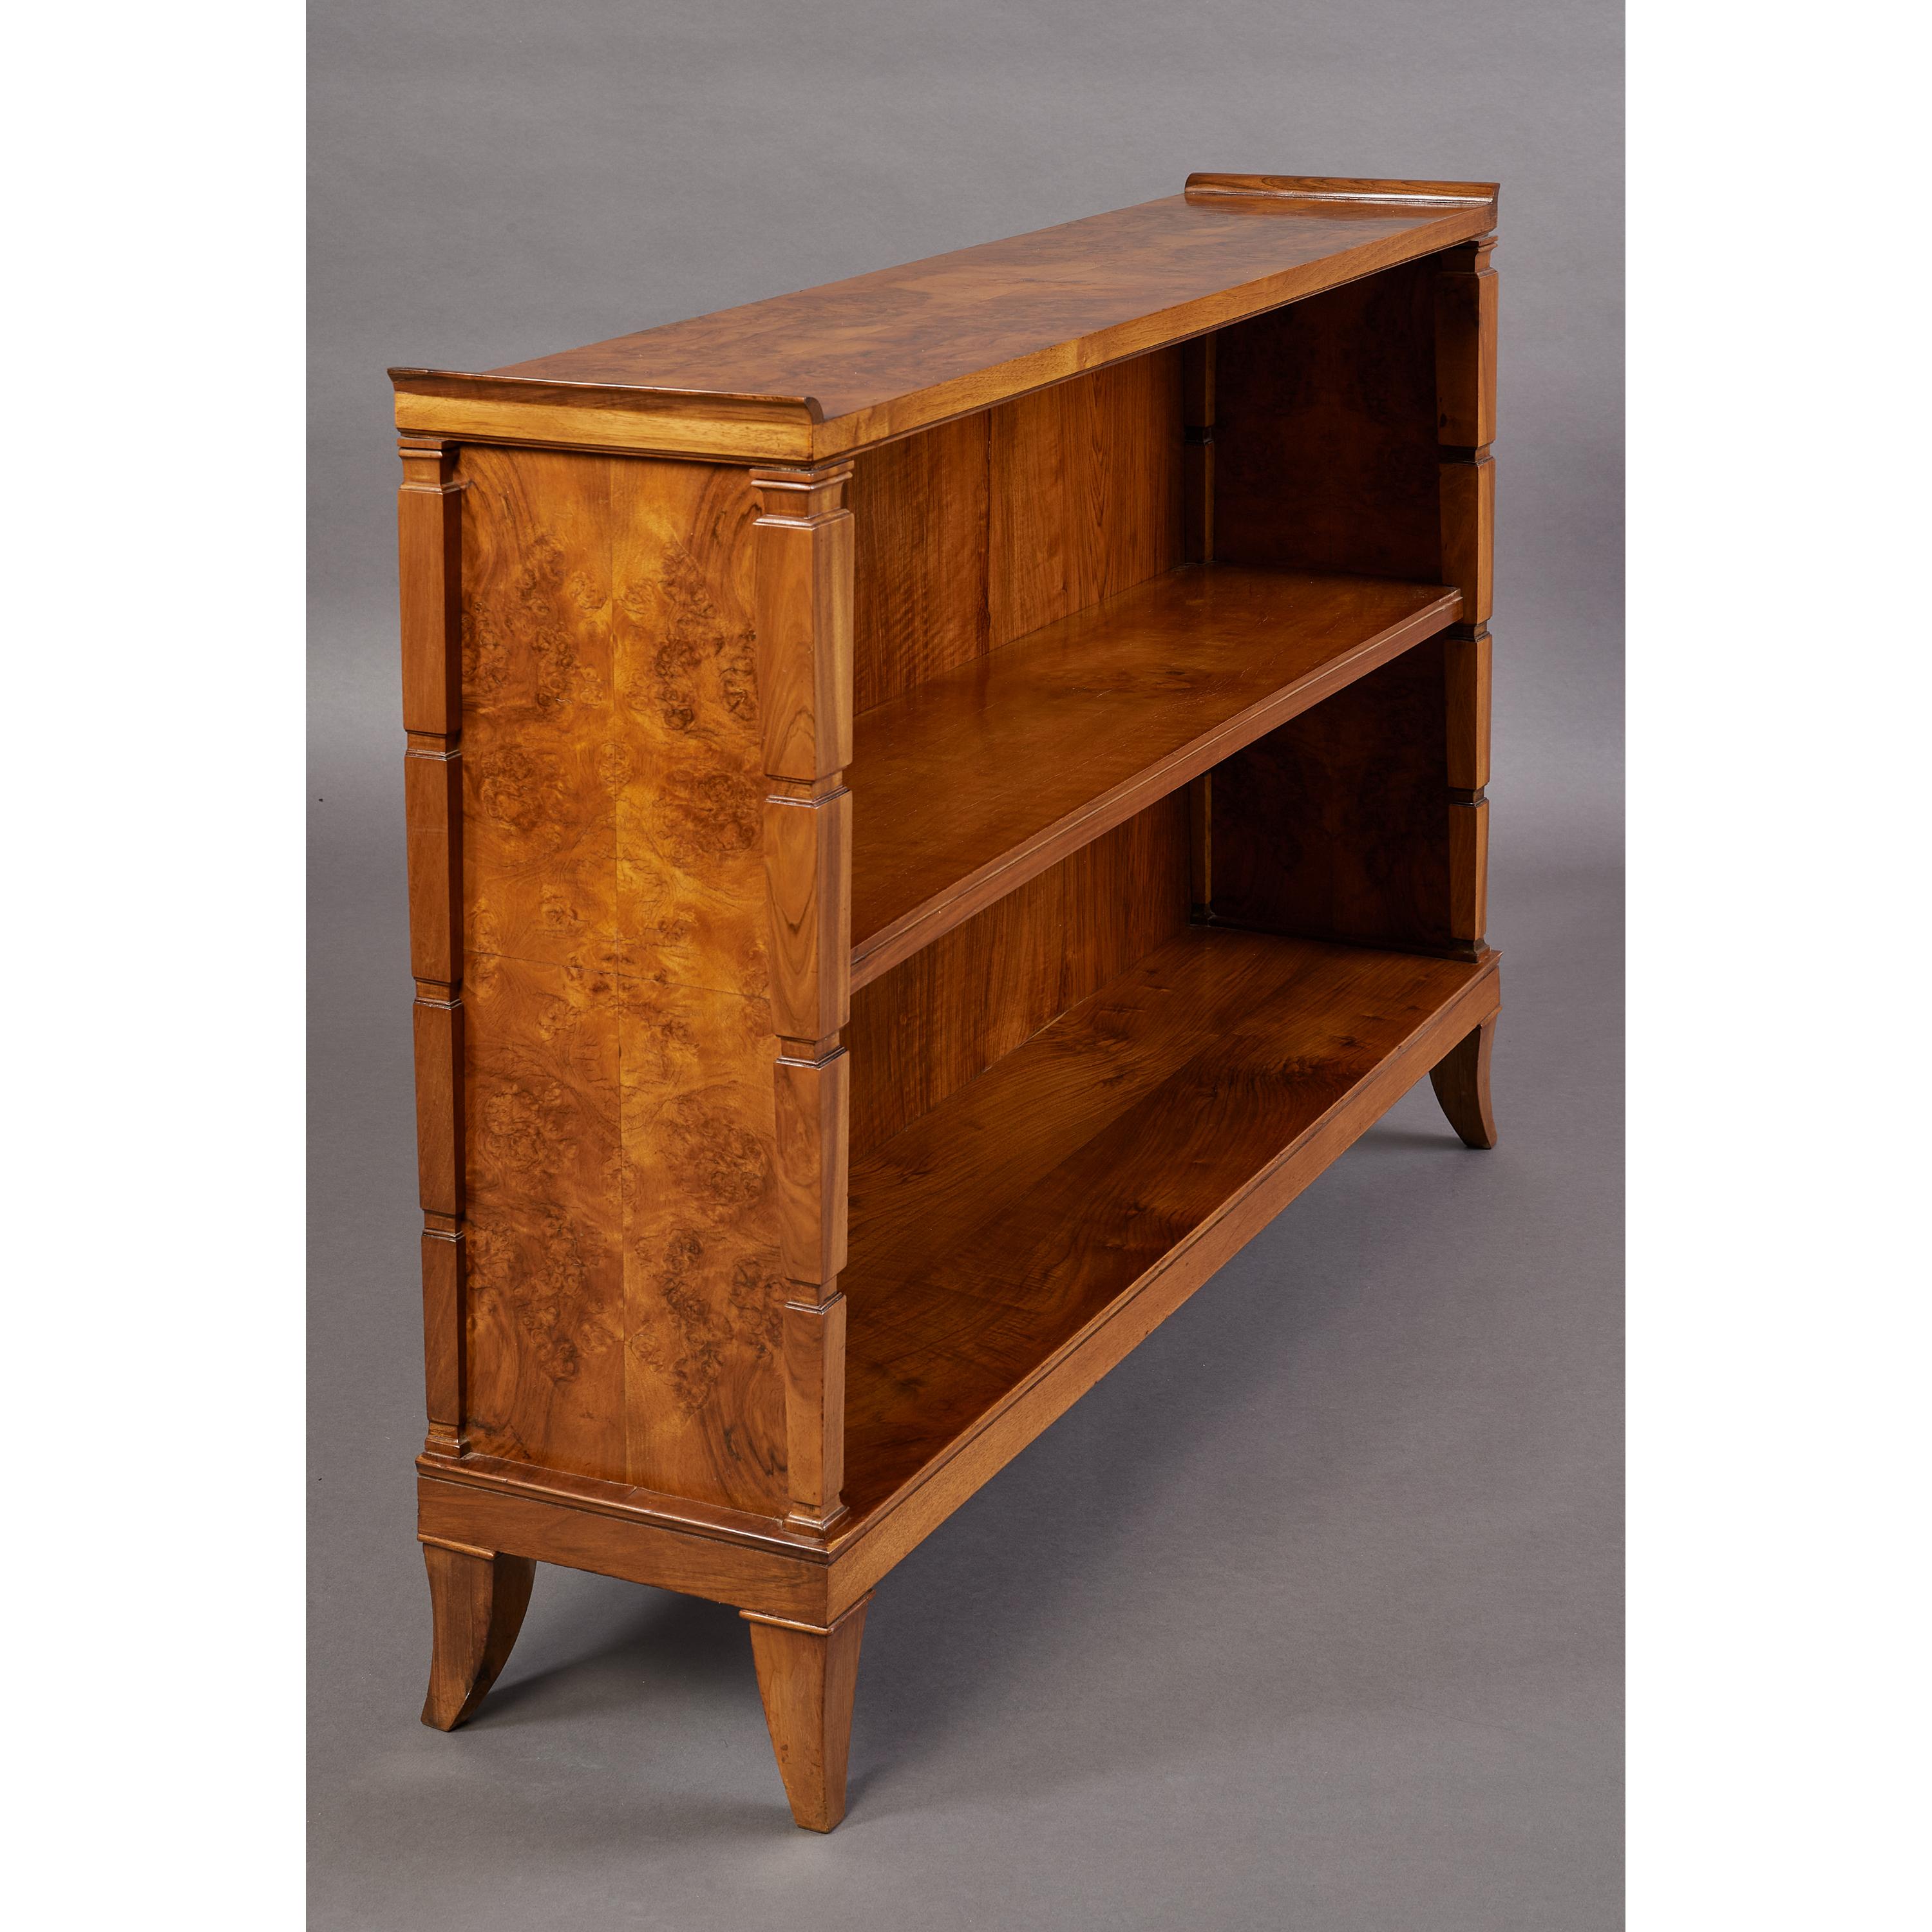 Wood Display Cabinet or Bookcase, School of Gio Ponti and Emilio Lancia, Italy 1940's